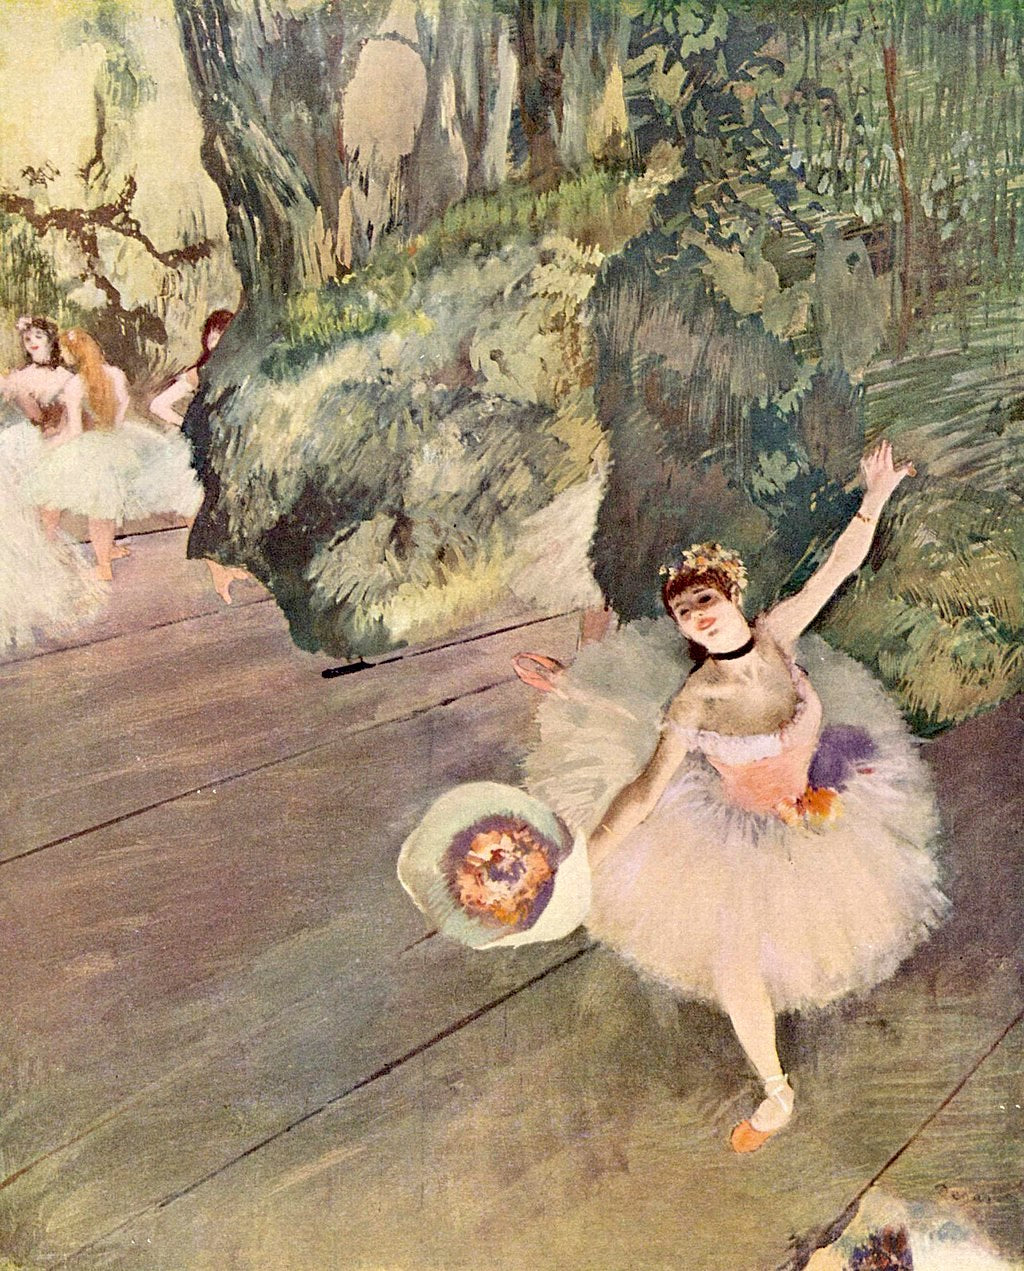 Dancer with a Bouquet of Flowers (Star of the Ballet), 1878 Painting by Edgar Degas Reproduction Oil Painting by Blue Surf Art